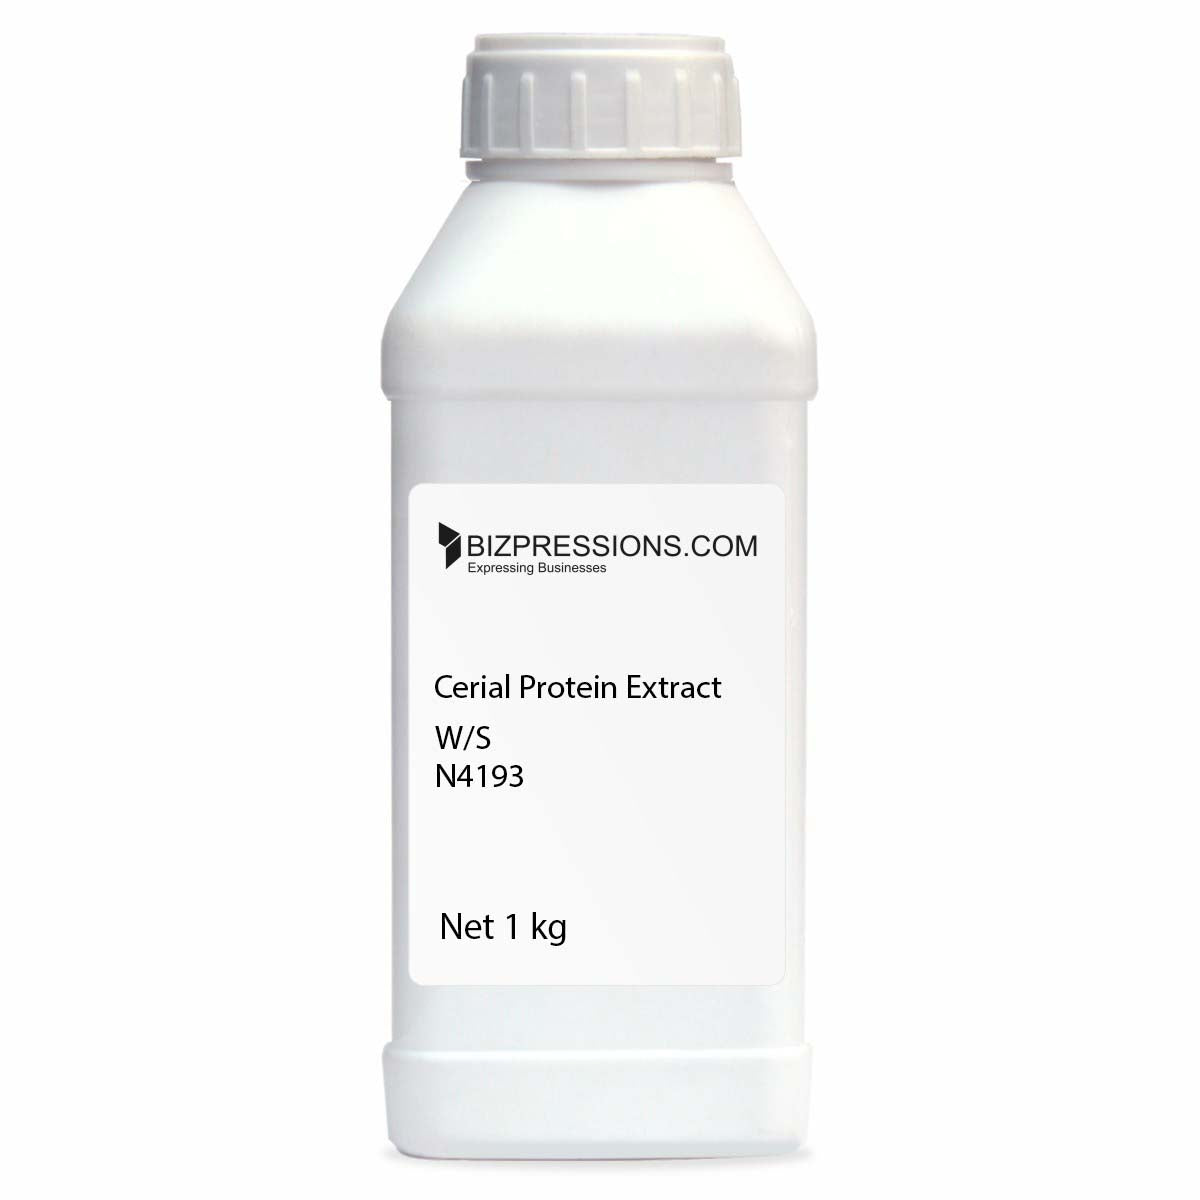 Cerial Protein Extract